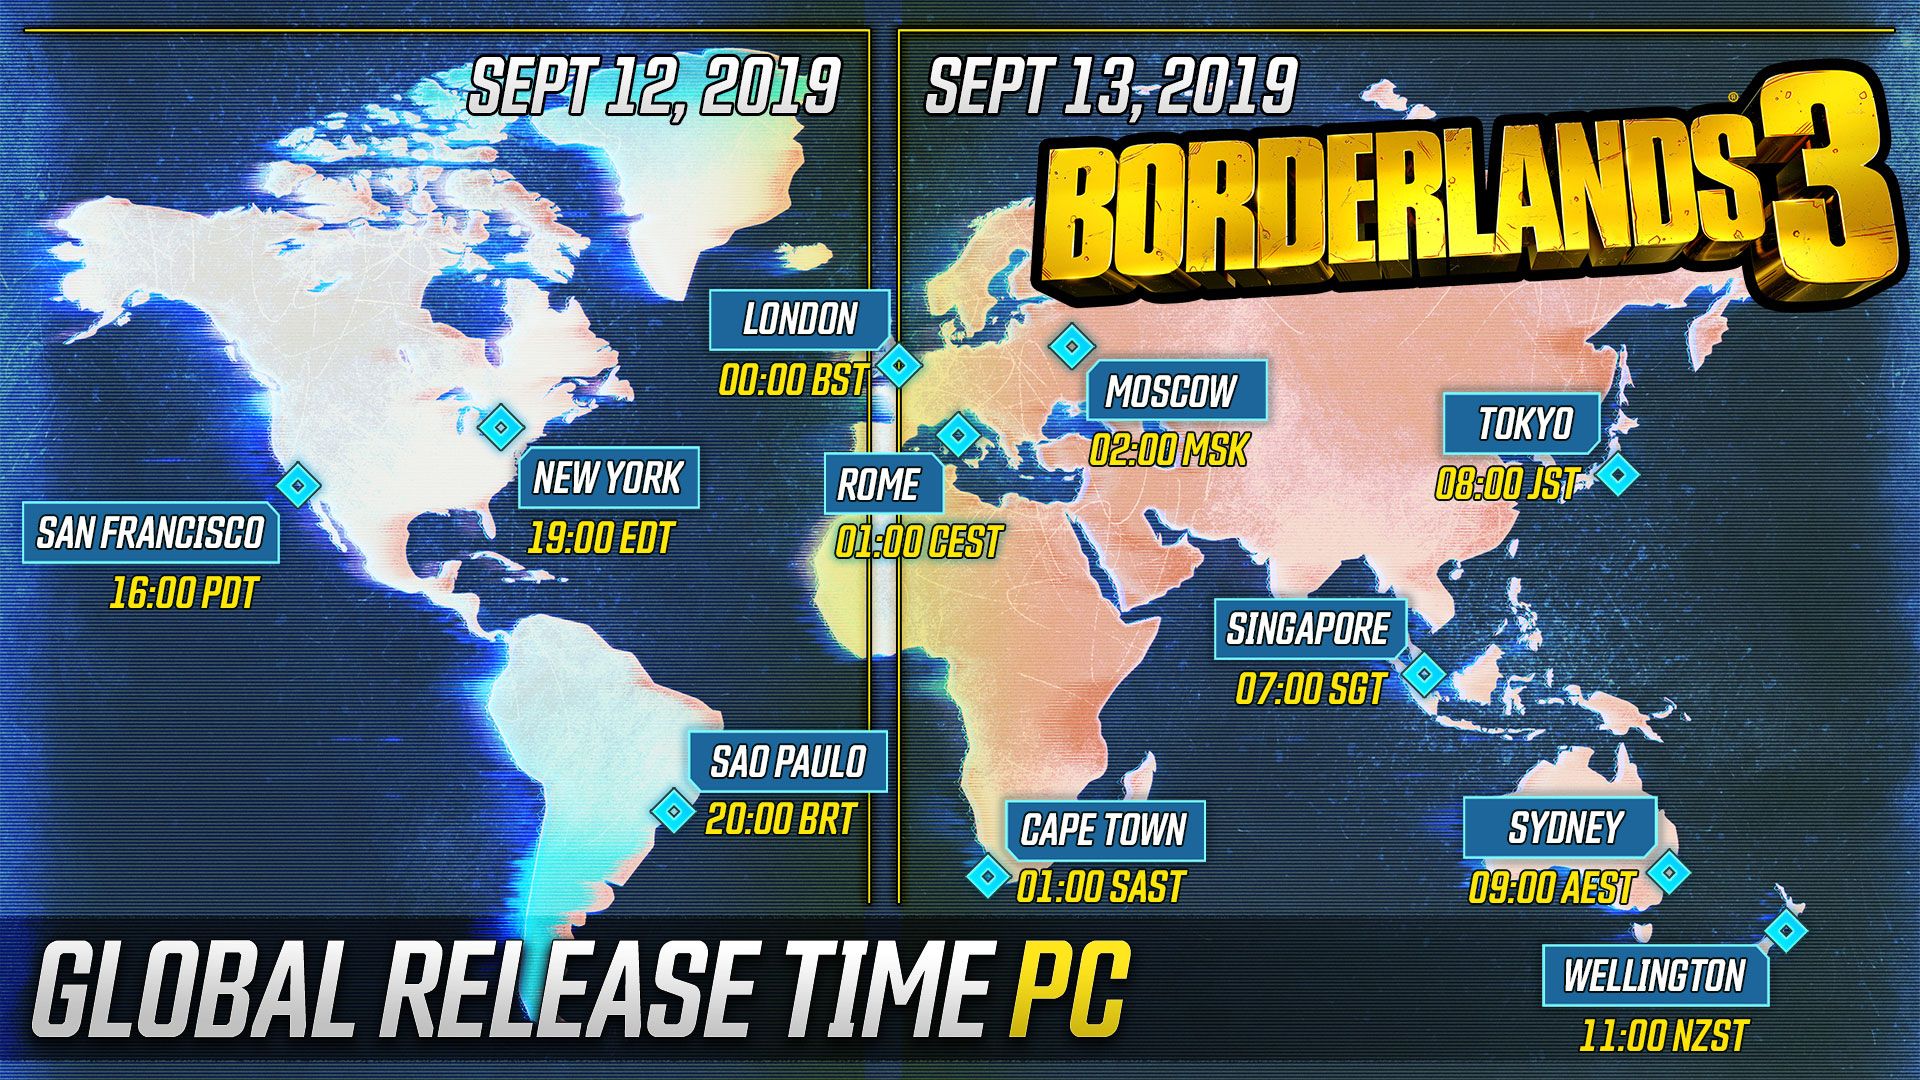 What Time Does Borderlands 3 Come Out